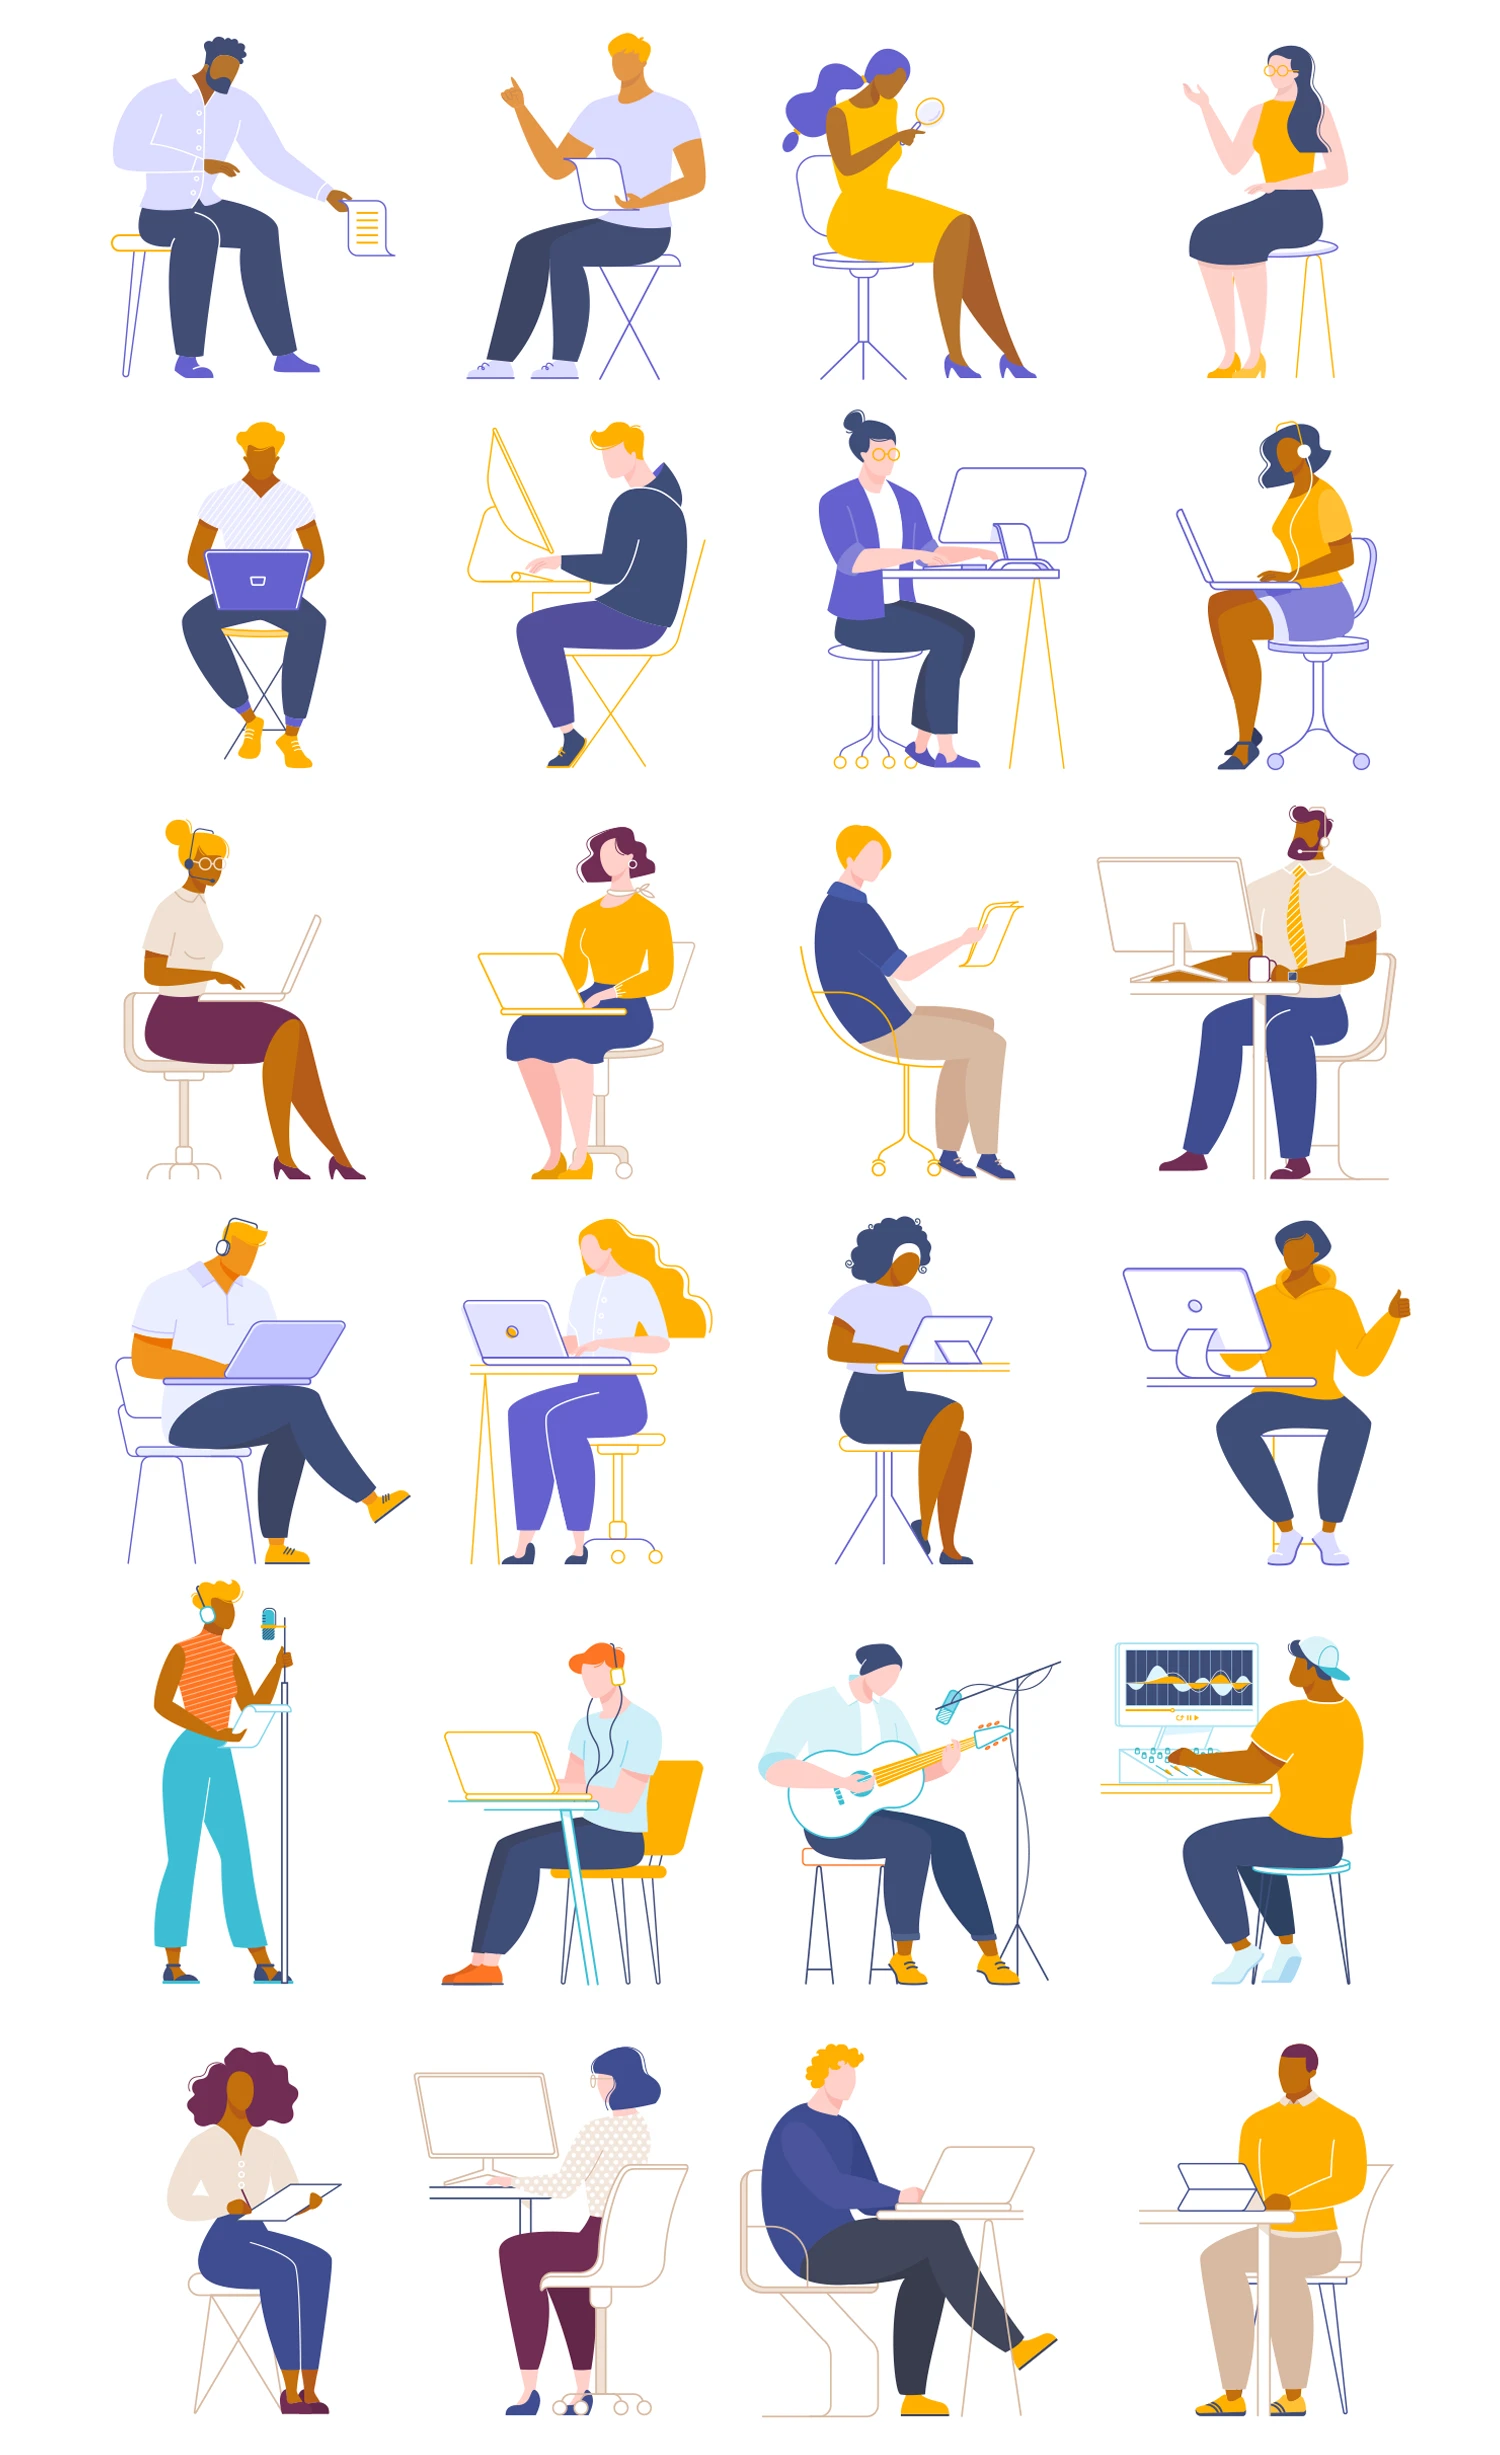 People Working Collaborating Illustrations - A free vector illustration pack of scenes and characters working, studying, typing, on calls, recording music, and creatively collaborating. No credit or attribution is needed, these illustrations are free to use for commercial and personal projects.